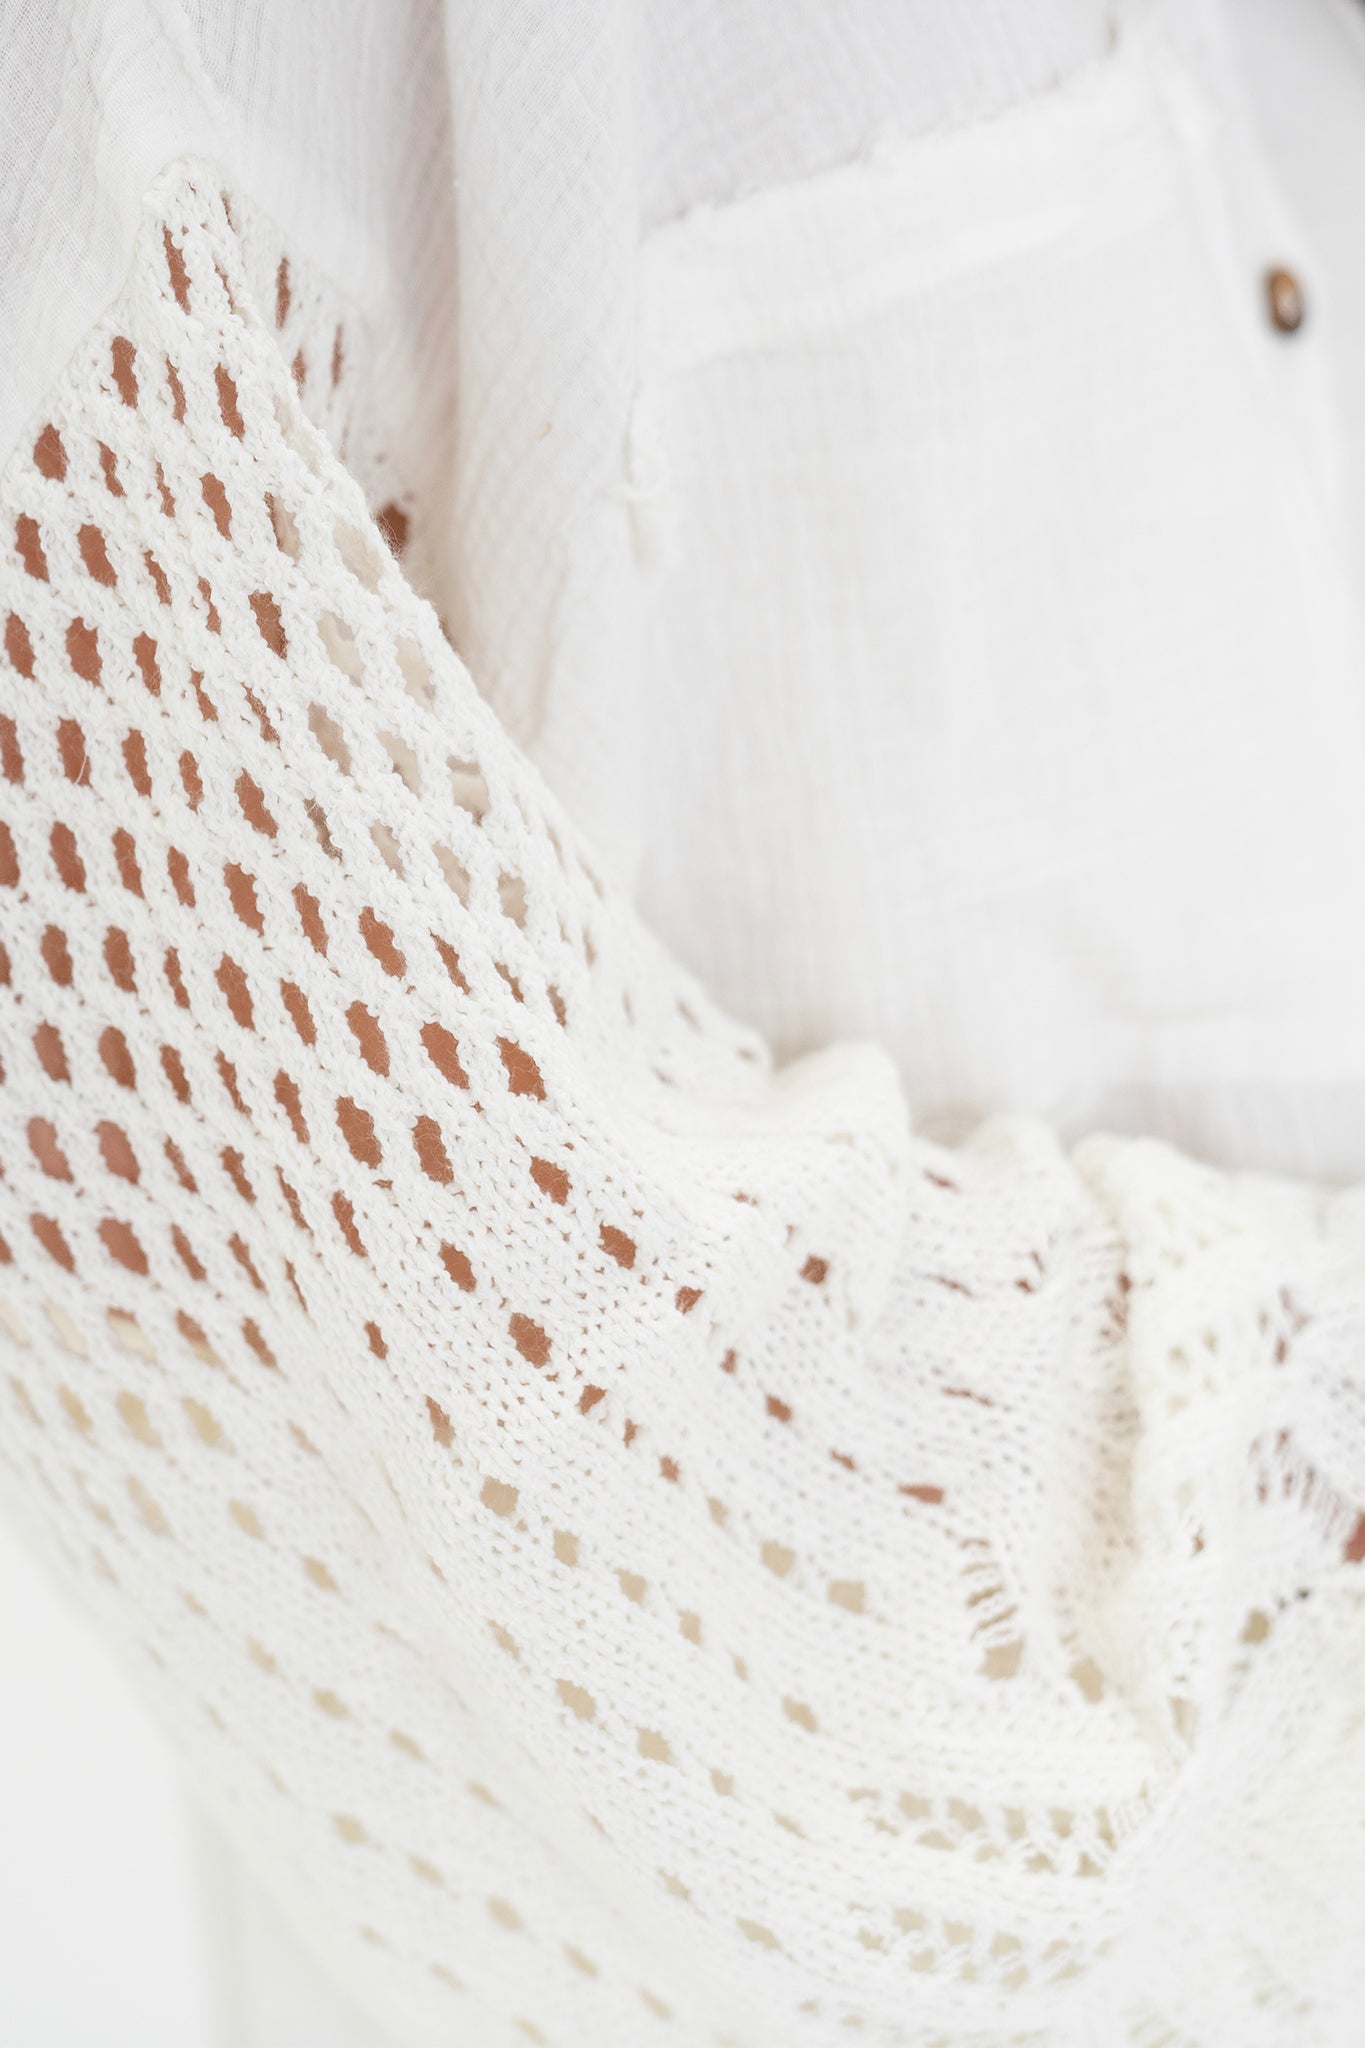 View 5 of Wisteria Cardigan in Off White, a Sweaters from Larrea Cove. Detail: .